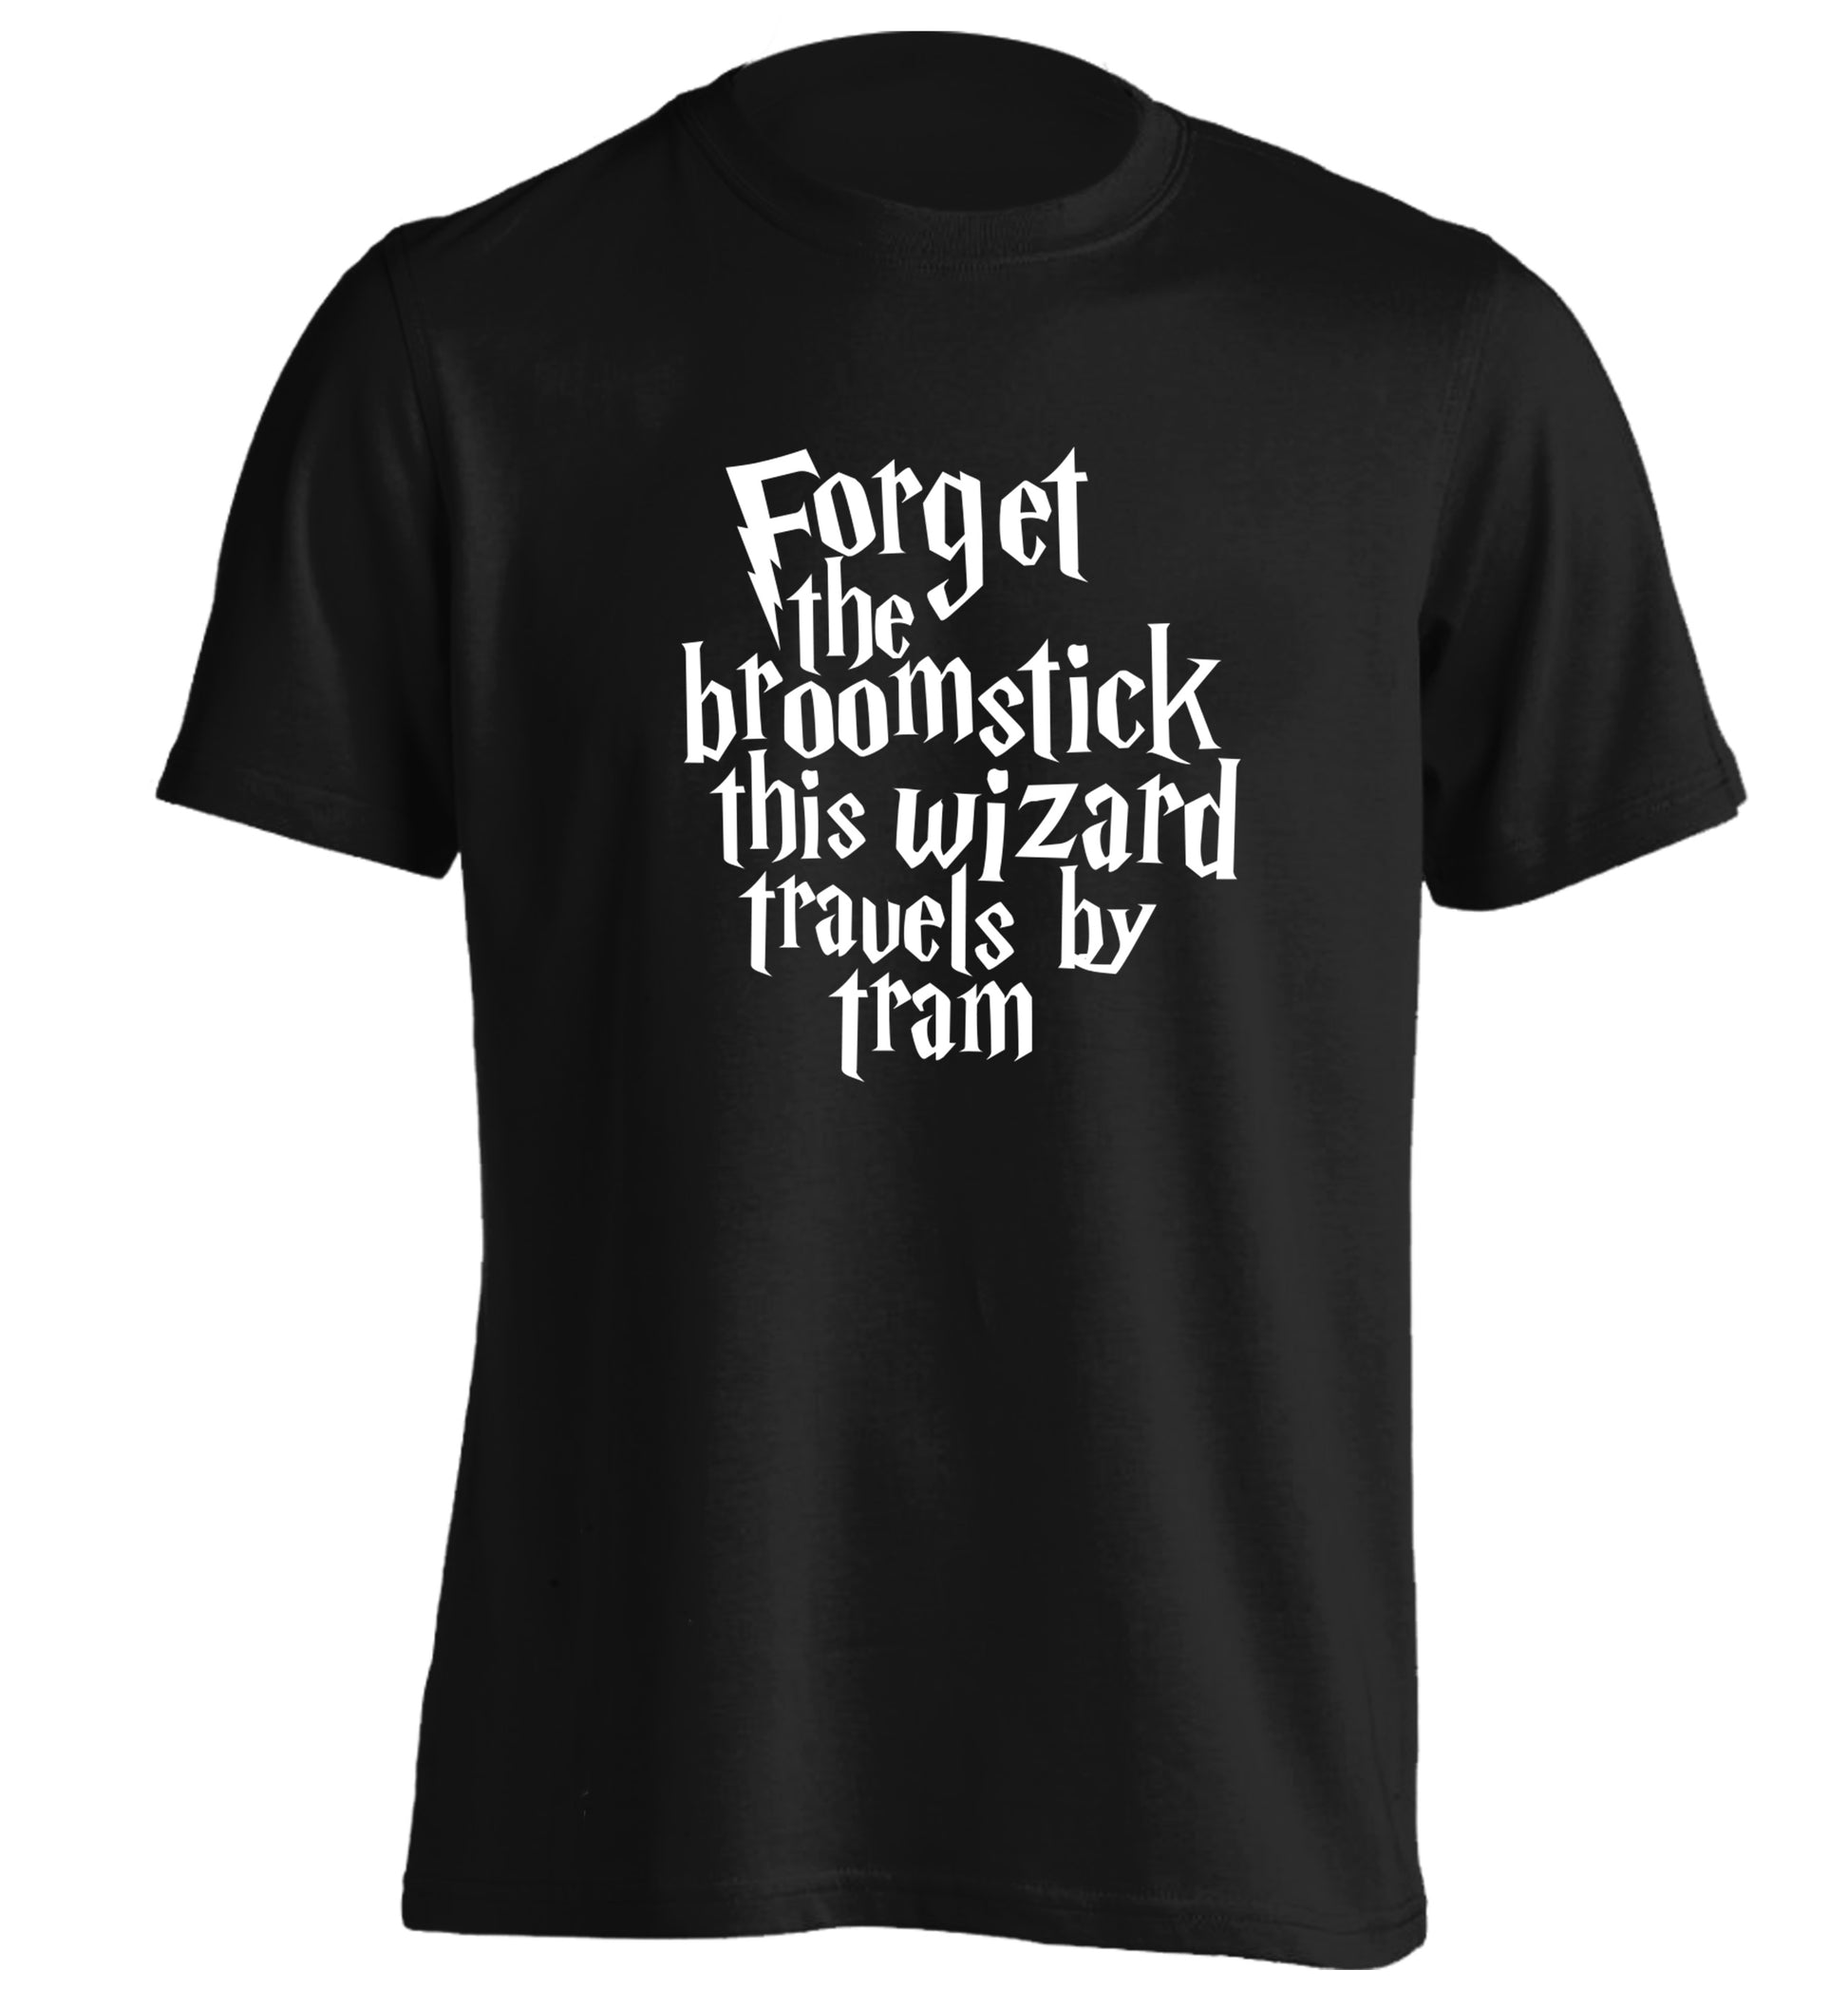 Forget the broomstick this wizard travels by tram adults unisexblack Tshirt 2XL